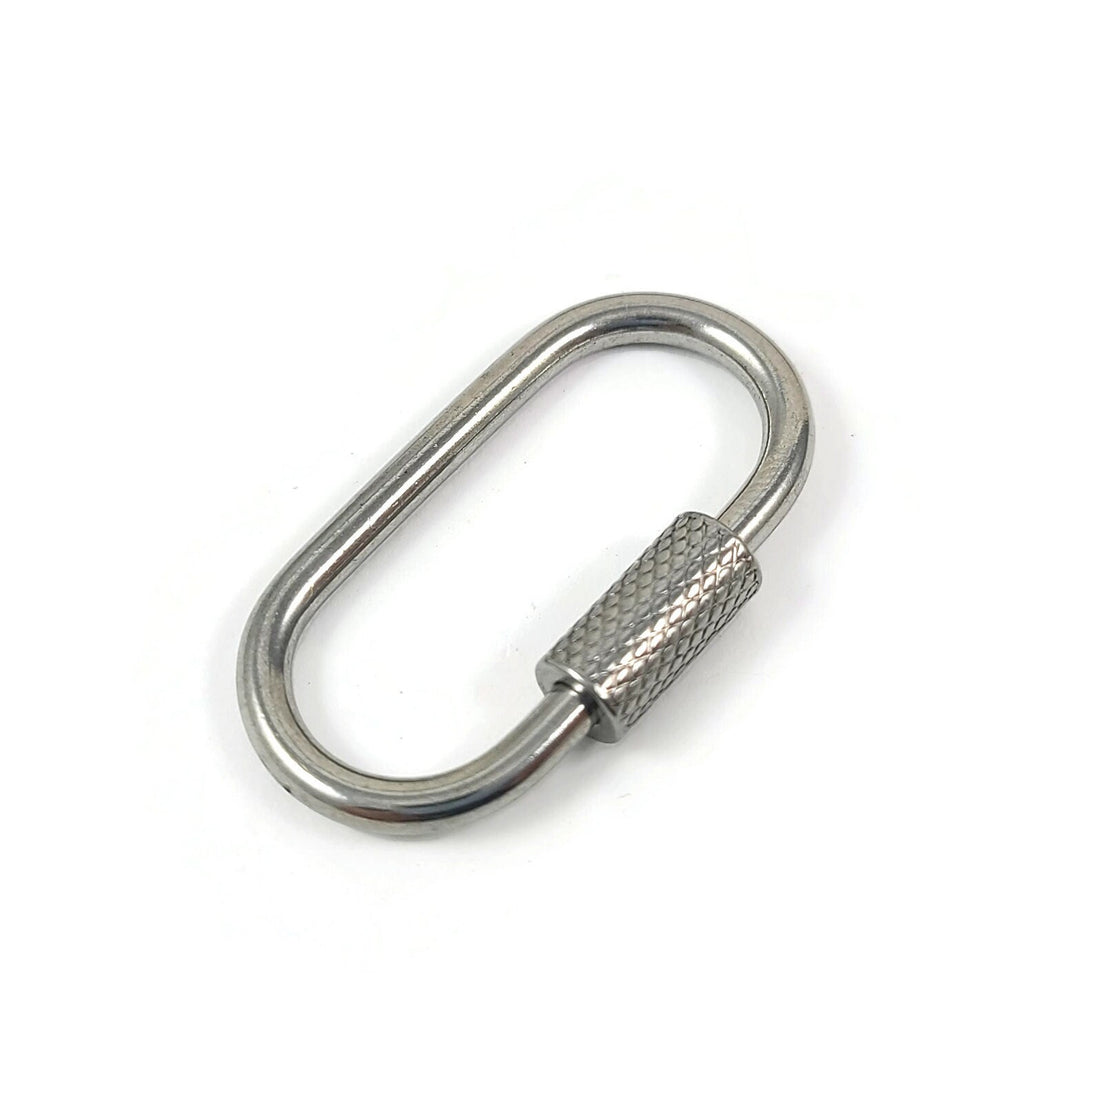 Stainless steel carabiner, Cute little clasp, Charm or connector necklace making, Bottle clip & key fob findings